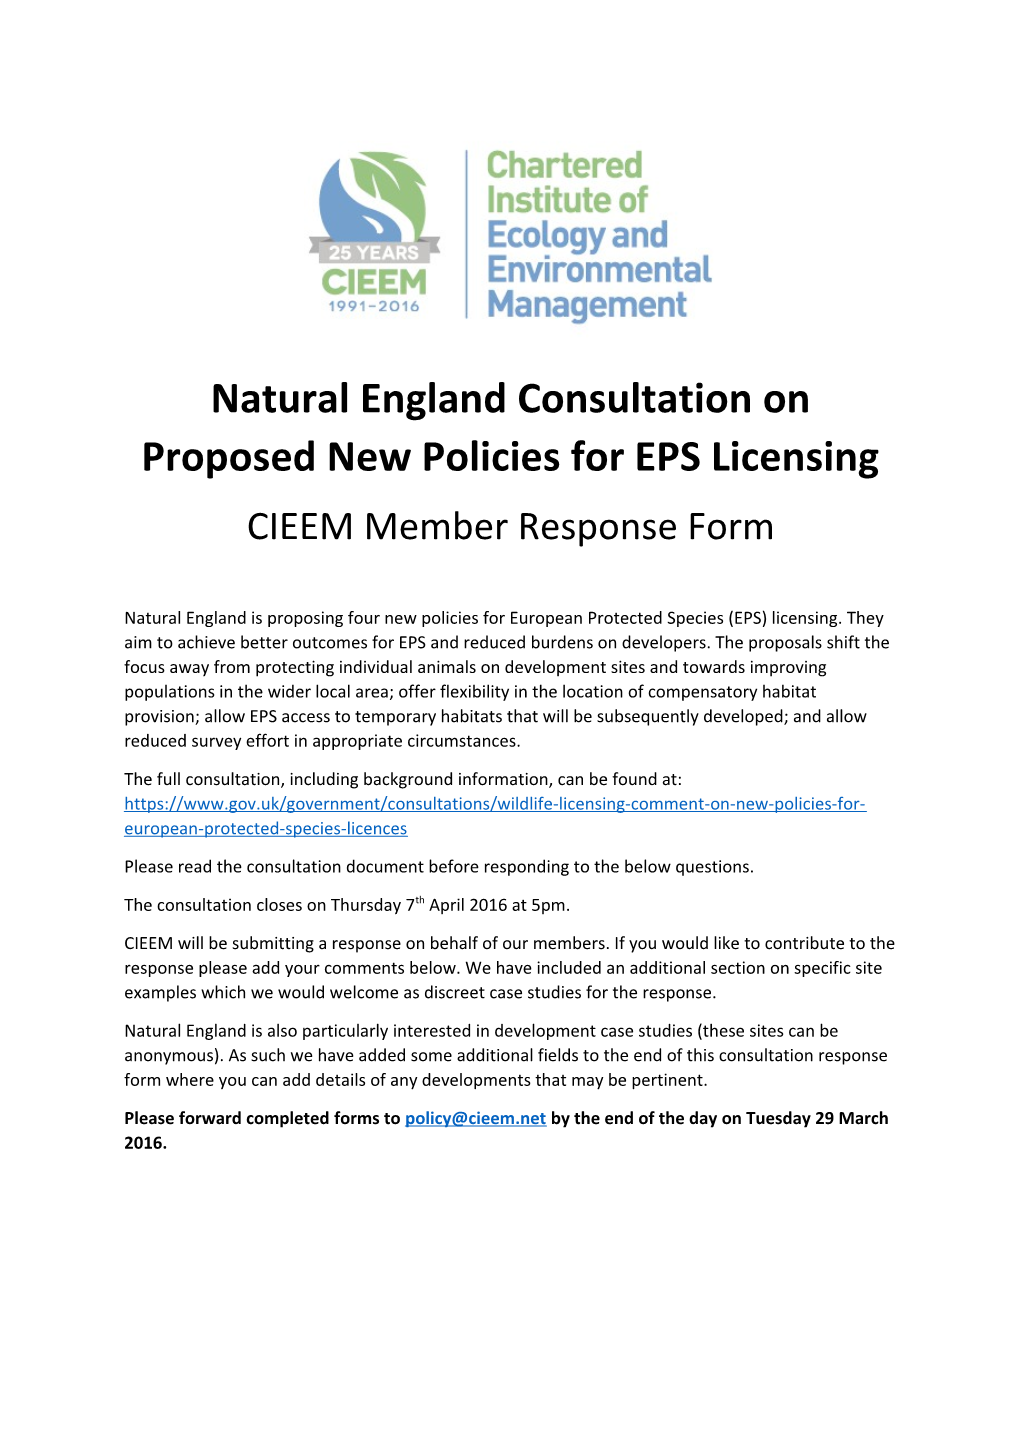 Natural England Consultation on Proposed New Policies for EPS Licensing